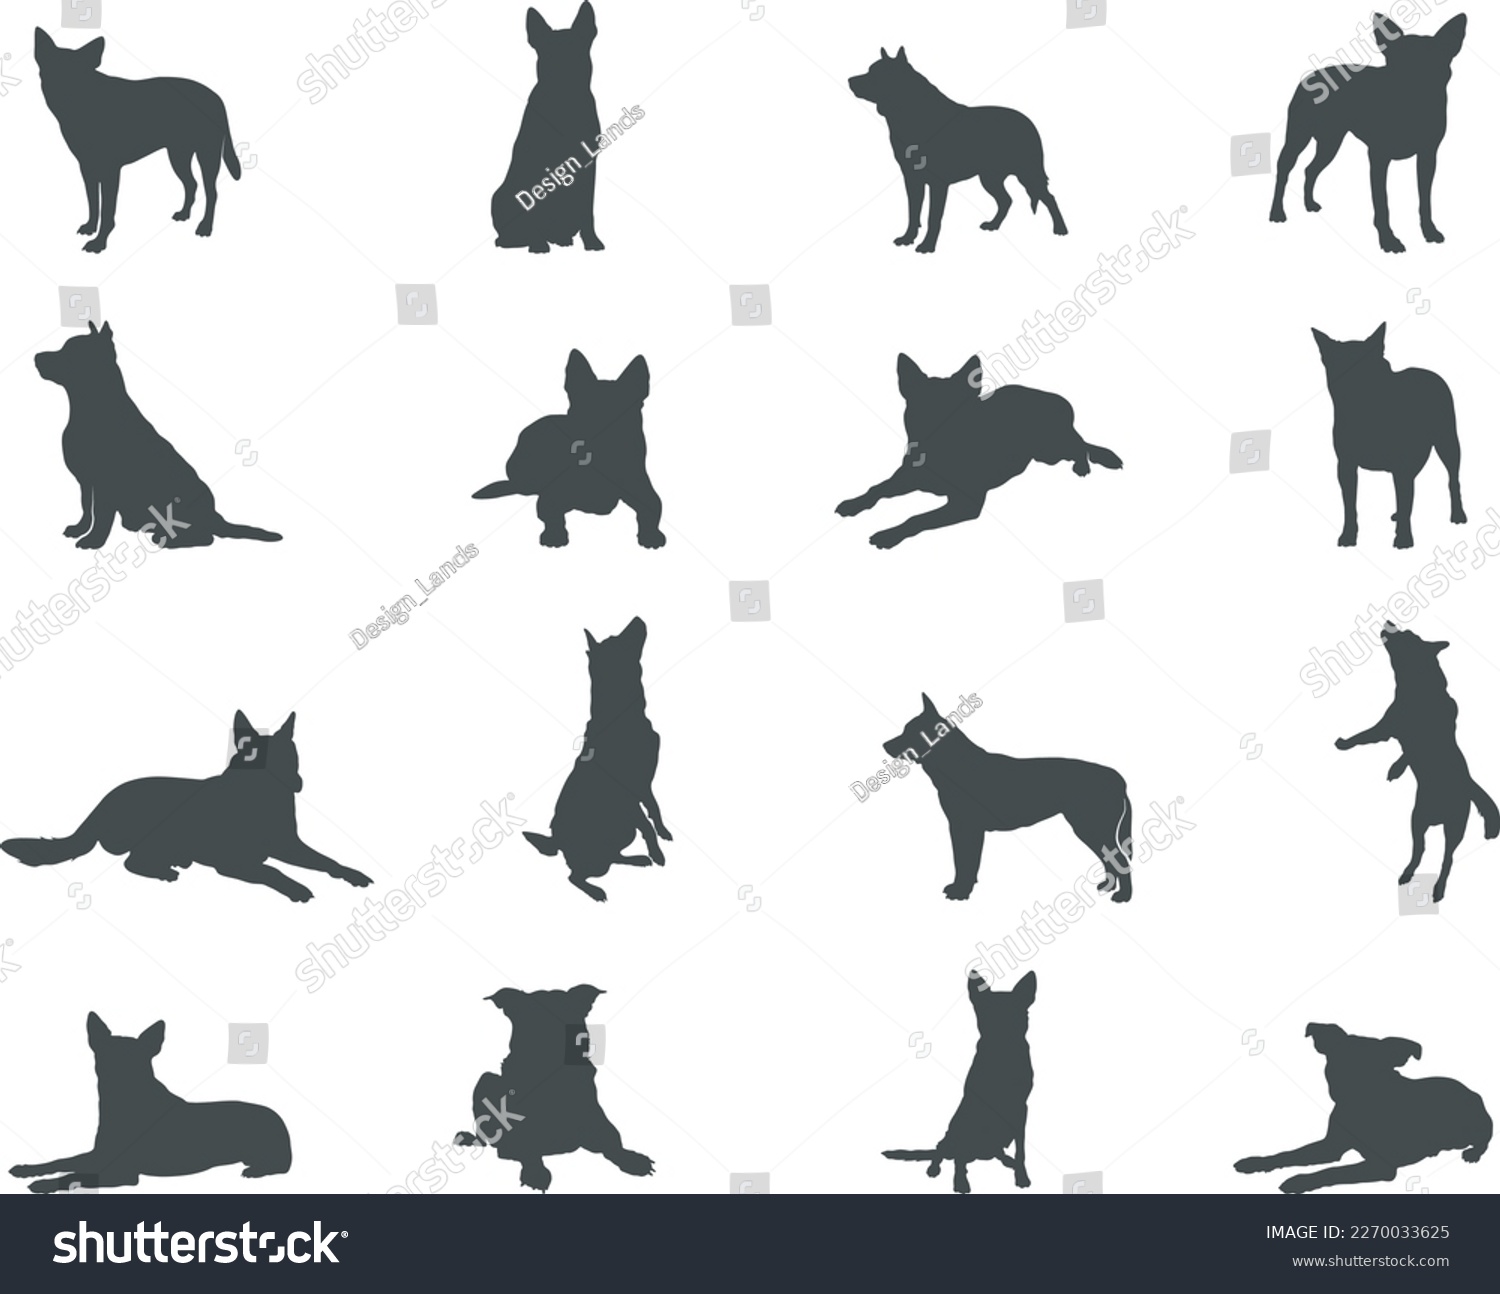 SVG of Australian cattle dog silhouettes, Australian cattle silhouettes, Australian cattle dog SVG svg